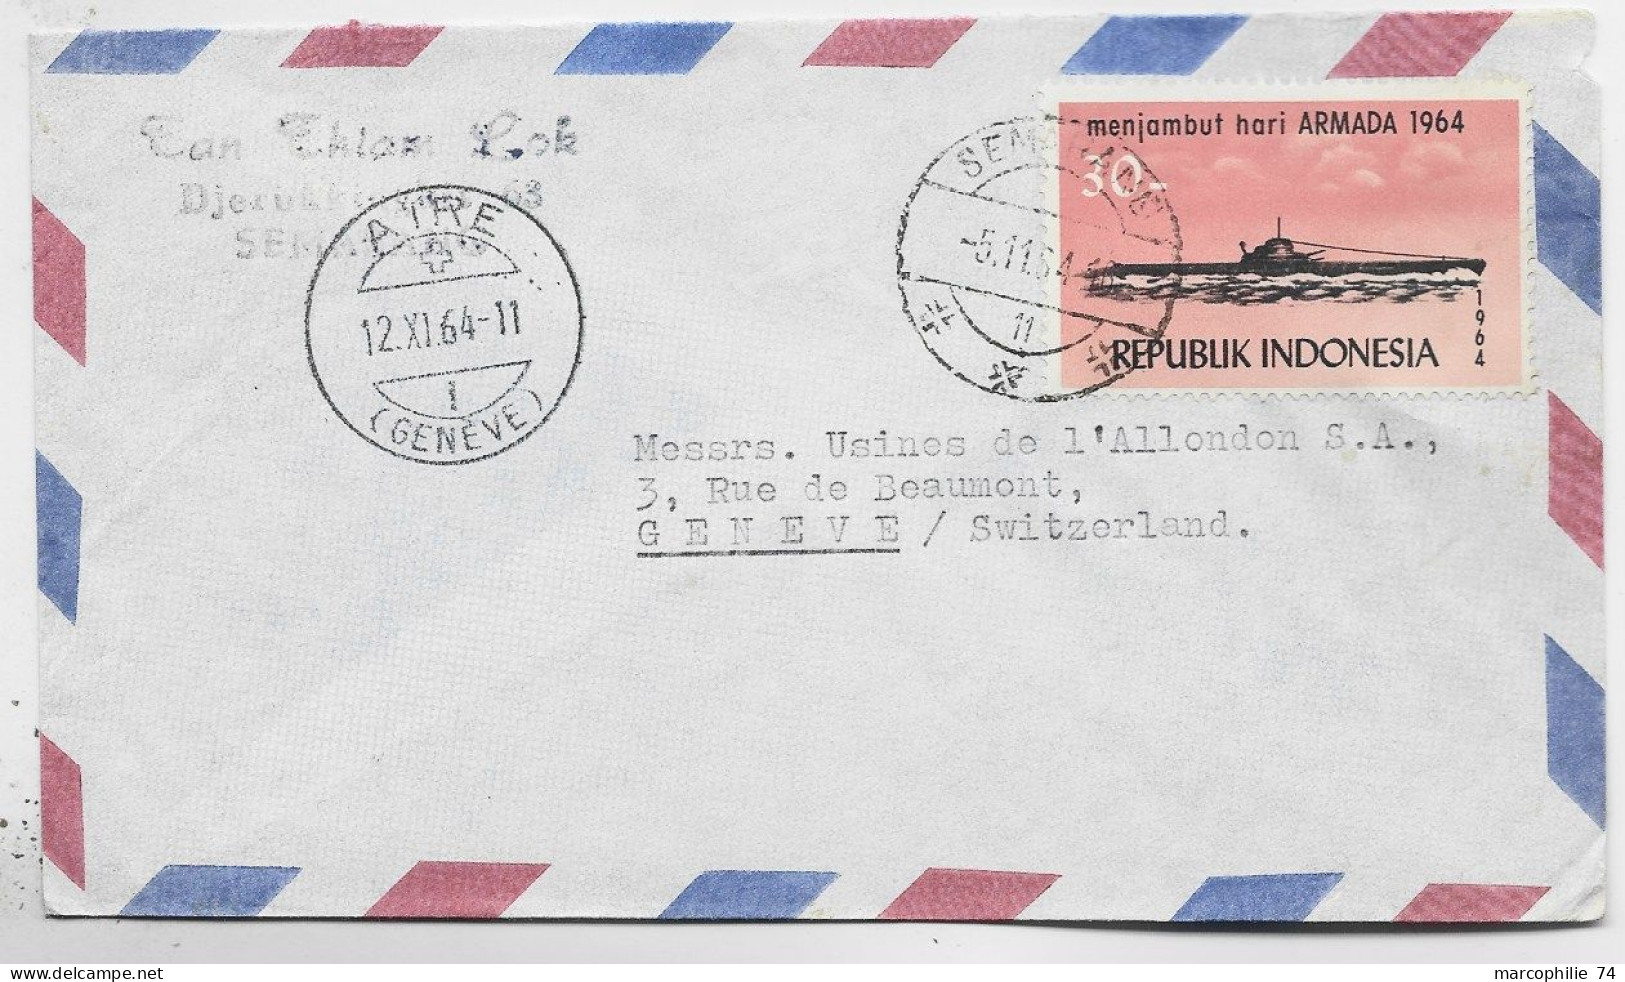 INDONESIA 30C SOUS MARIN SOLO LETTRE COVER AIR MAIL SEMARANG 5.11.1964 TO SUISSE AIRE GENEVE - Indonesia